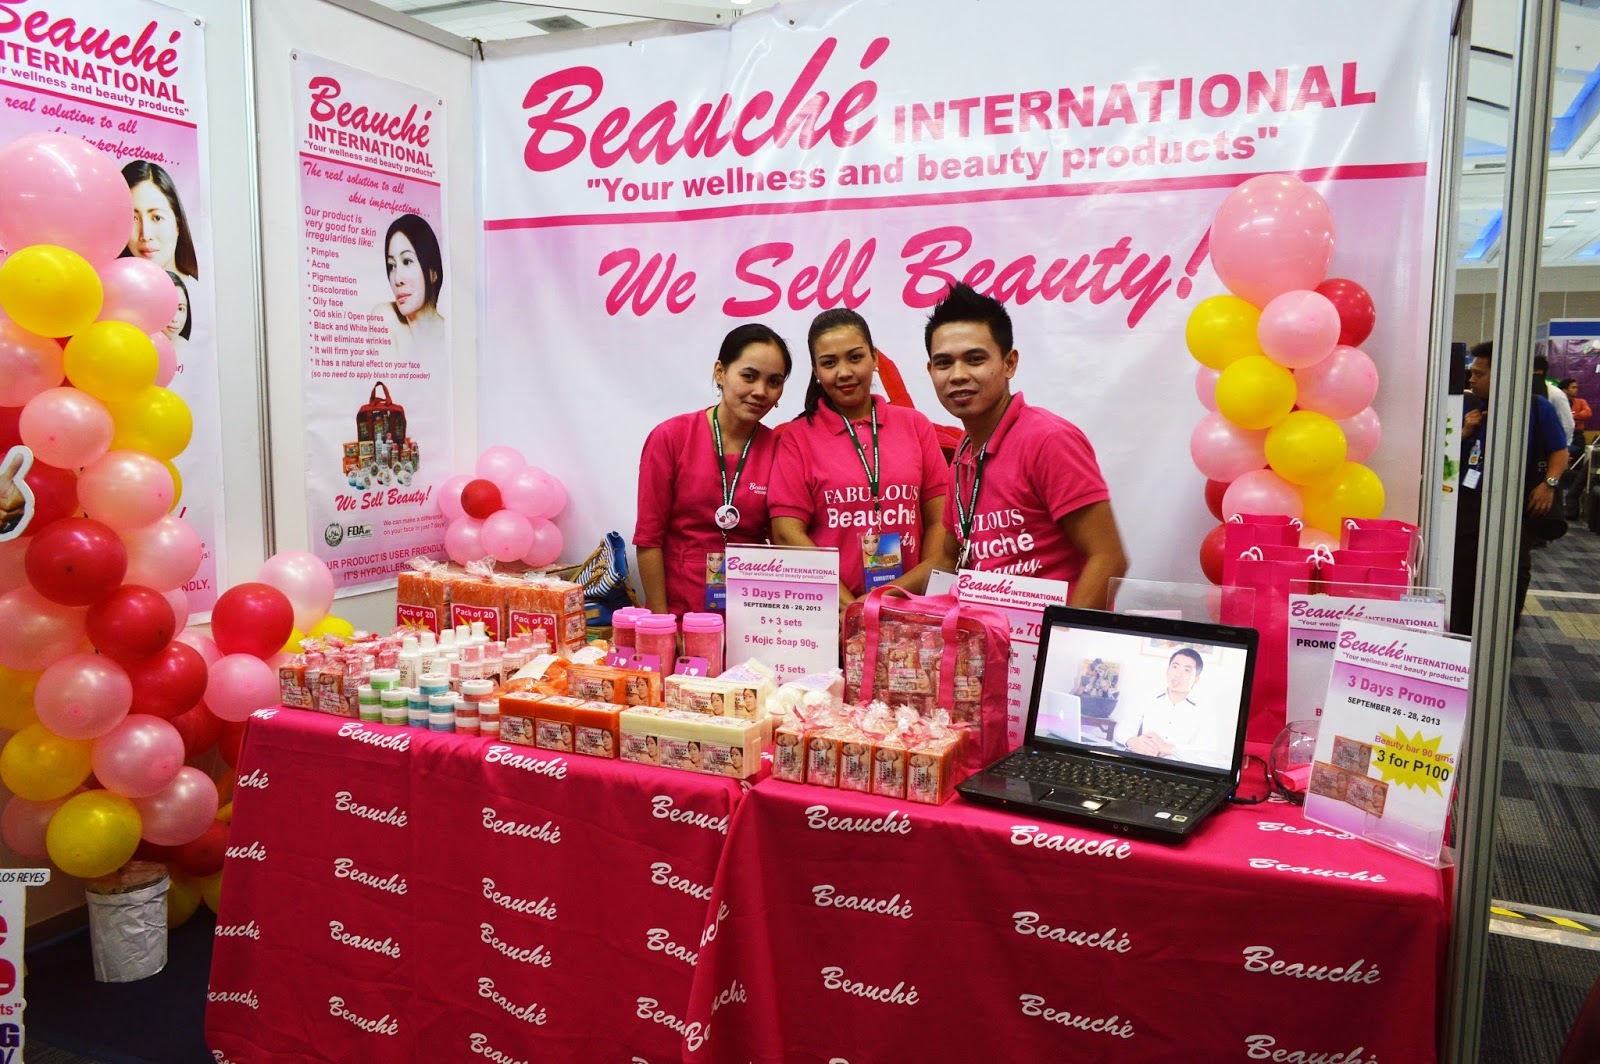 2nd International Beauty, Health & Wellness Expo set at SMX Mall of Asia